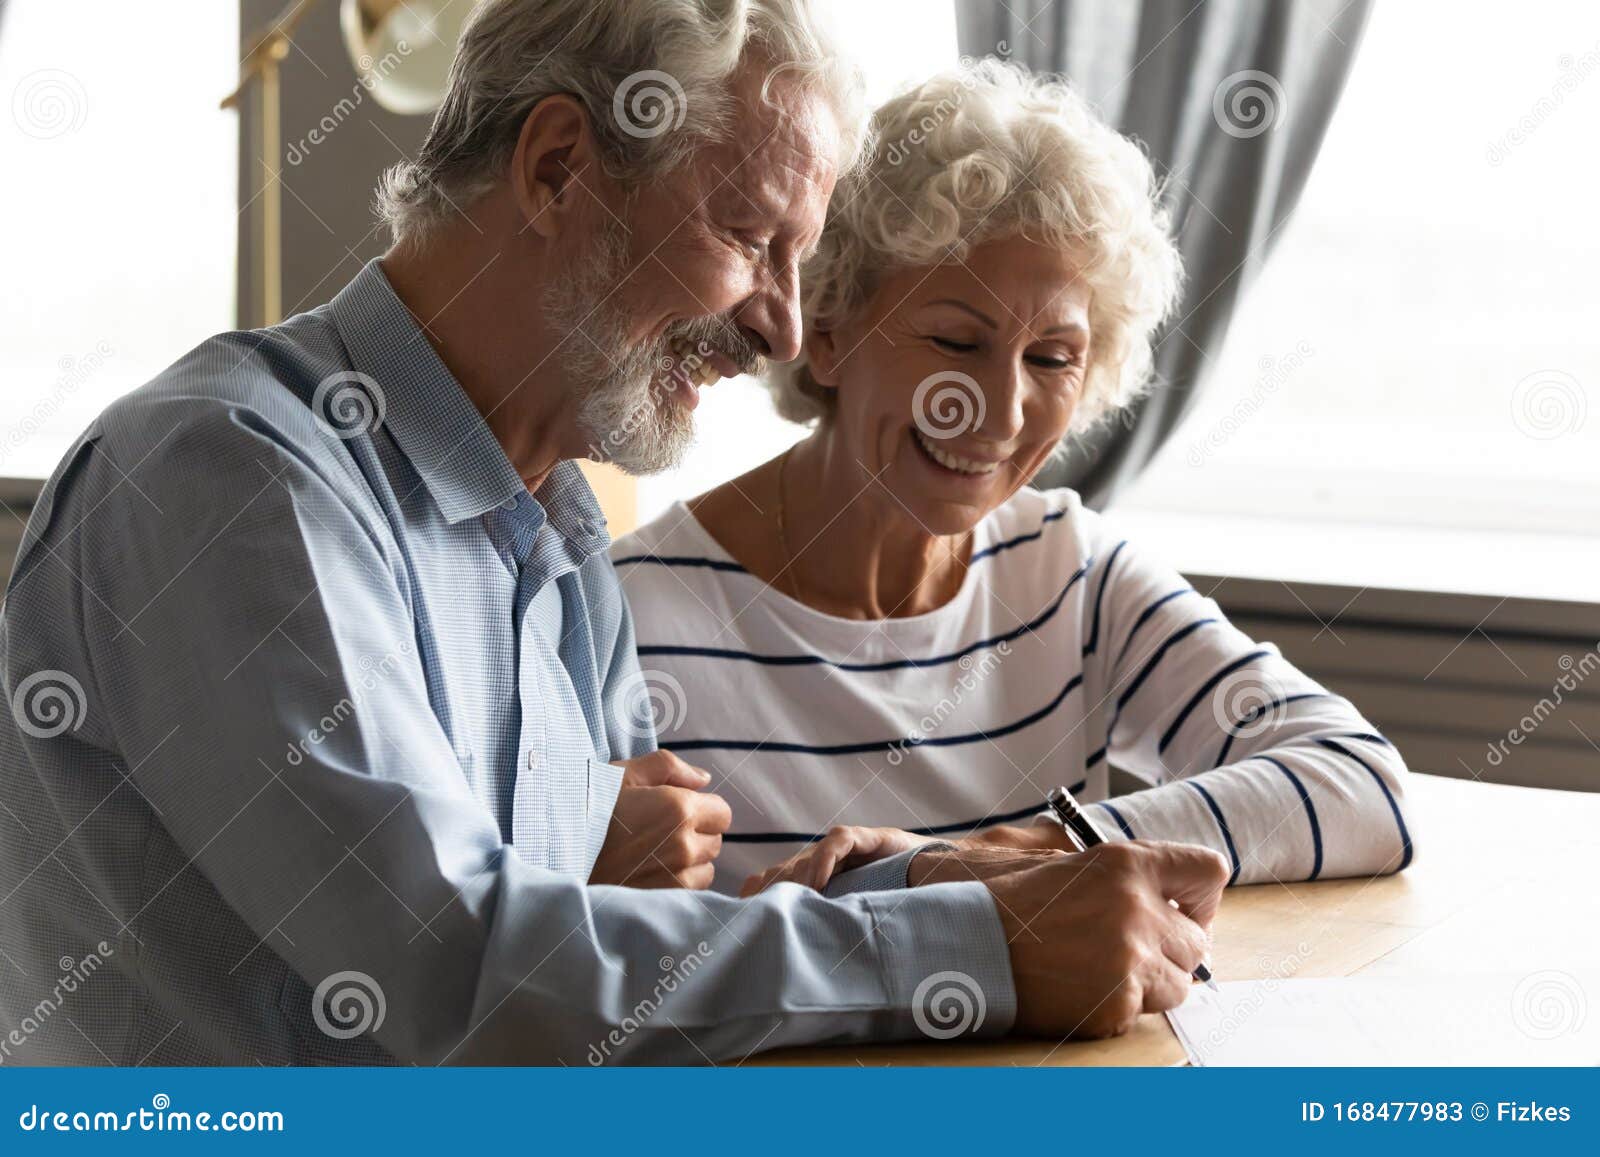 satisfied senior couple signing agreement buying medical health insurance